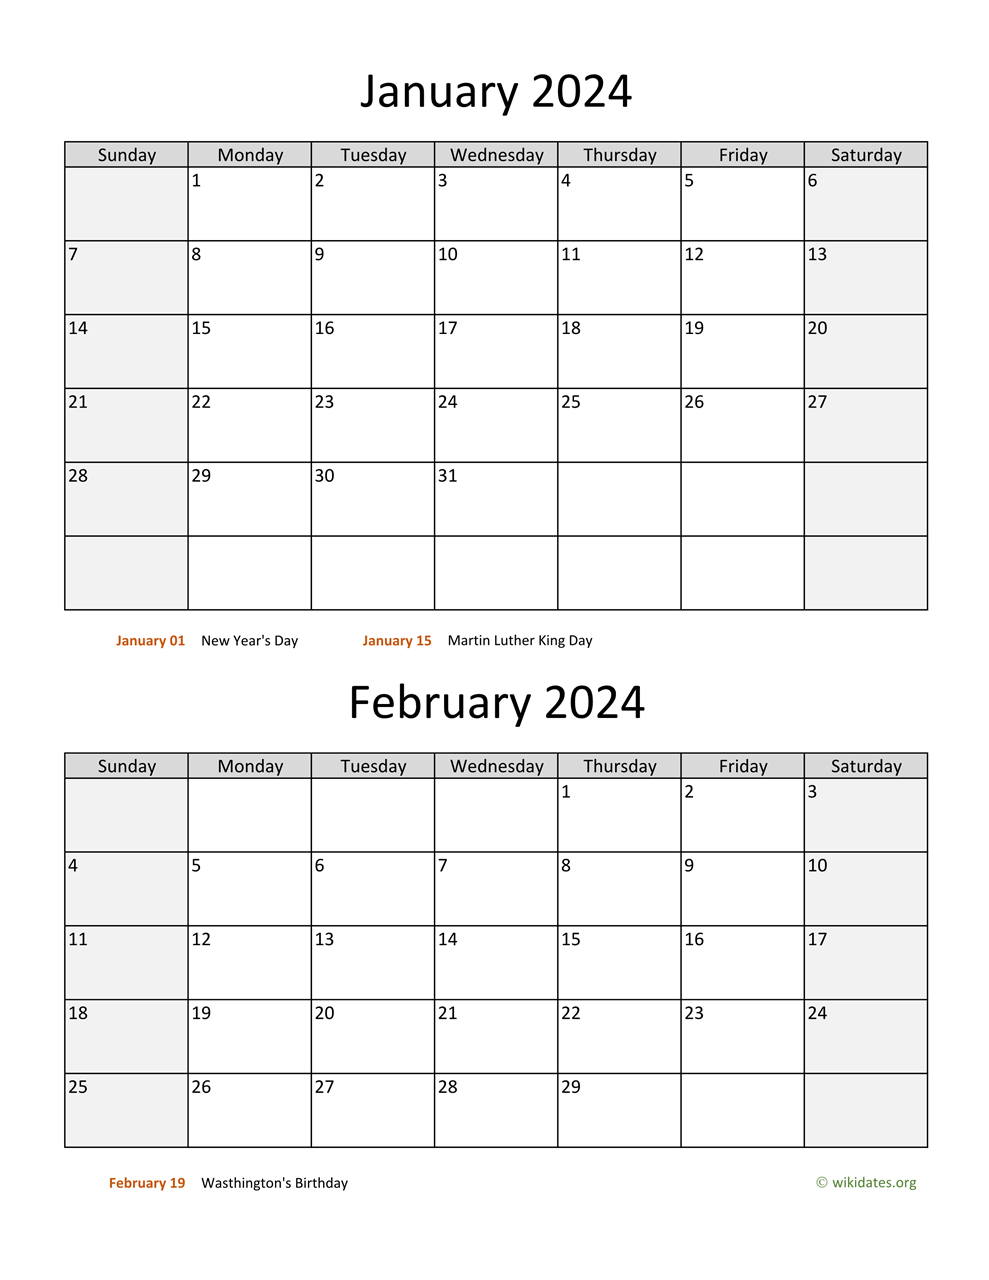 January And February 2024 Calendar | Wikidates for January February 2024 Calendar Printable